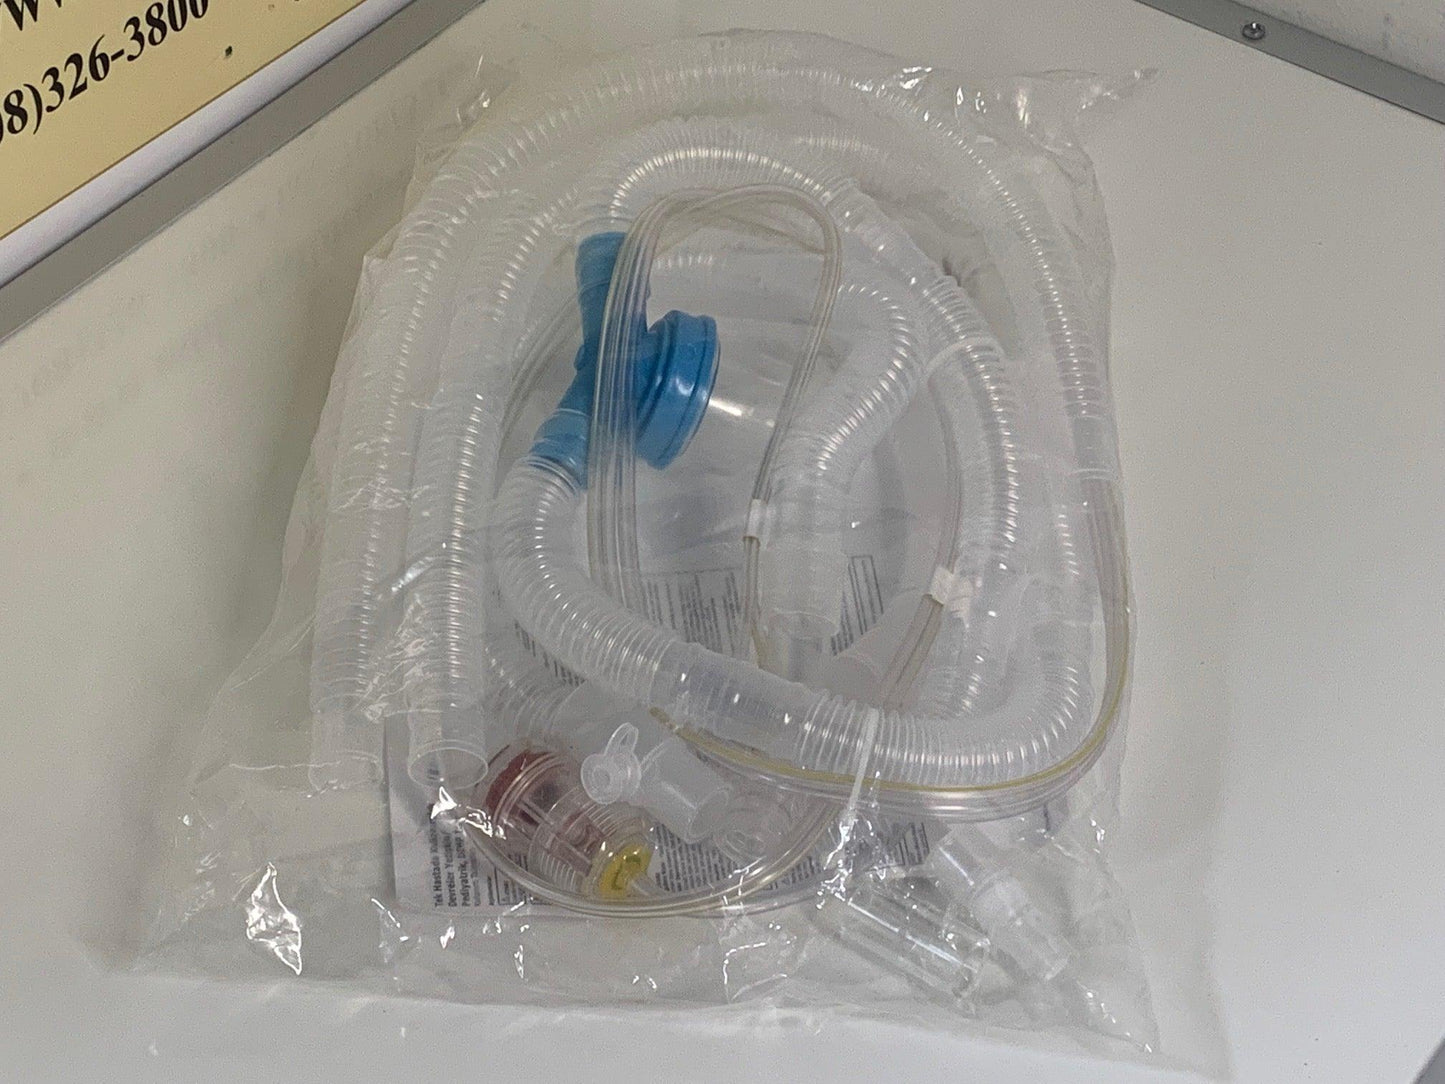 NEW 10PK CareFusion Vyaire Patient Circuit W/PEEP, W/1 Water Trap SPU 22mm 29697-001 - MBR Medicals